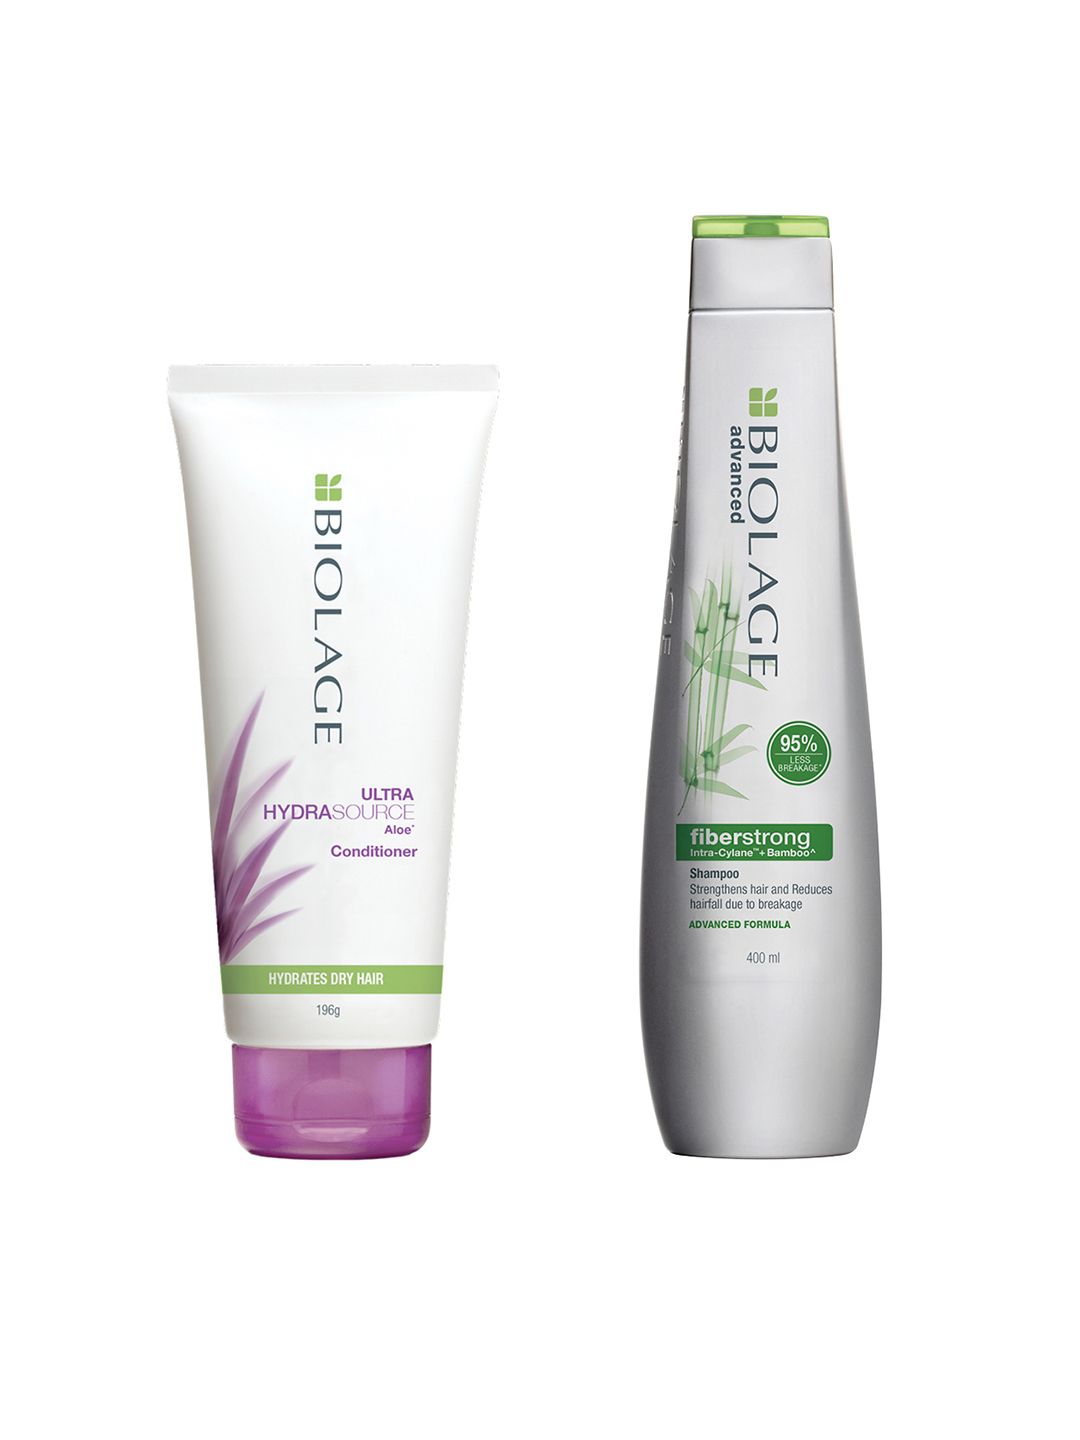 Biolage Set of Advanced Fiber Strong Bamboo Shampoo & Ultra Hydra Source Aloe Conditioner Price in India